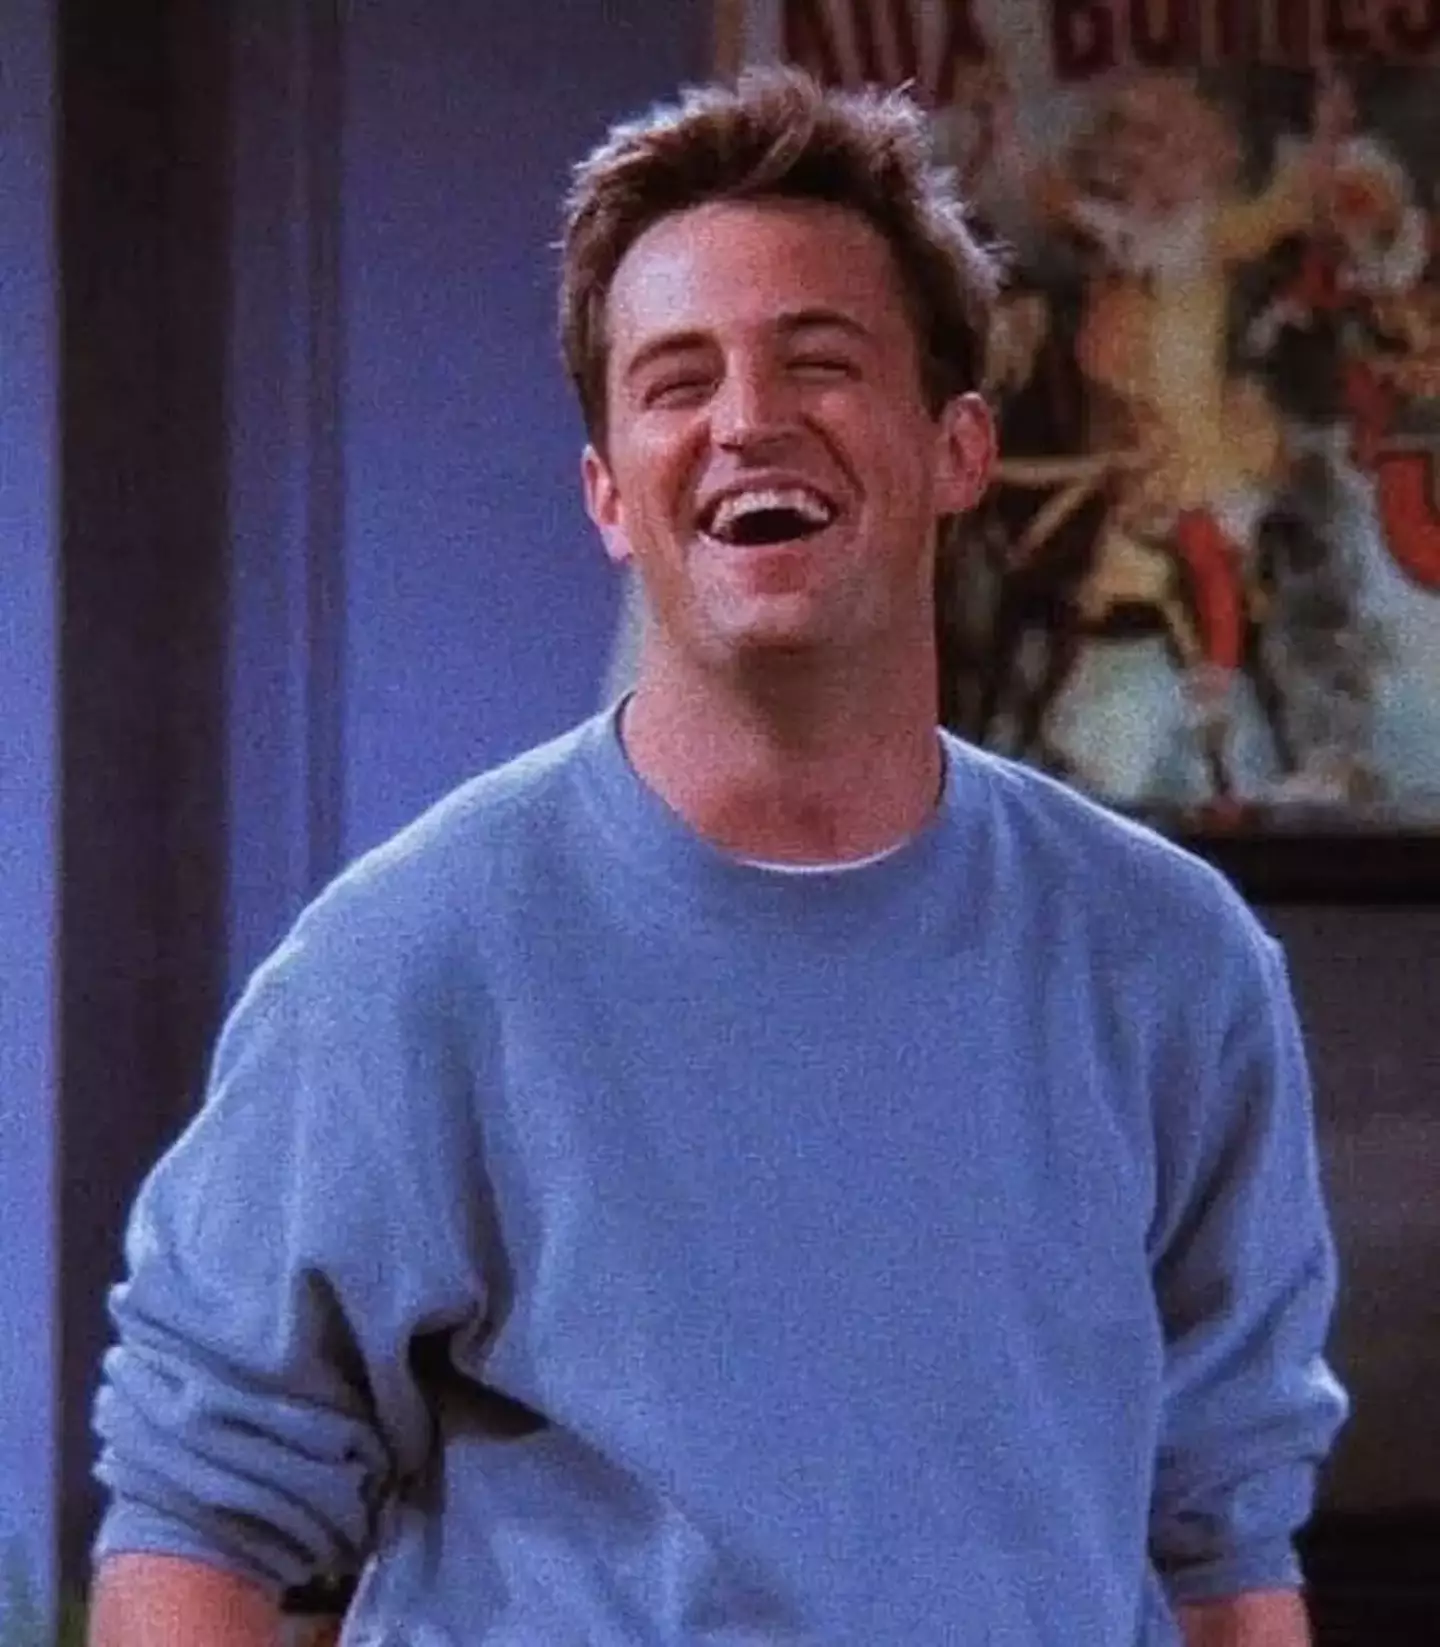 Matthew Perry was best known for playing Chandler Bing in Friends.